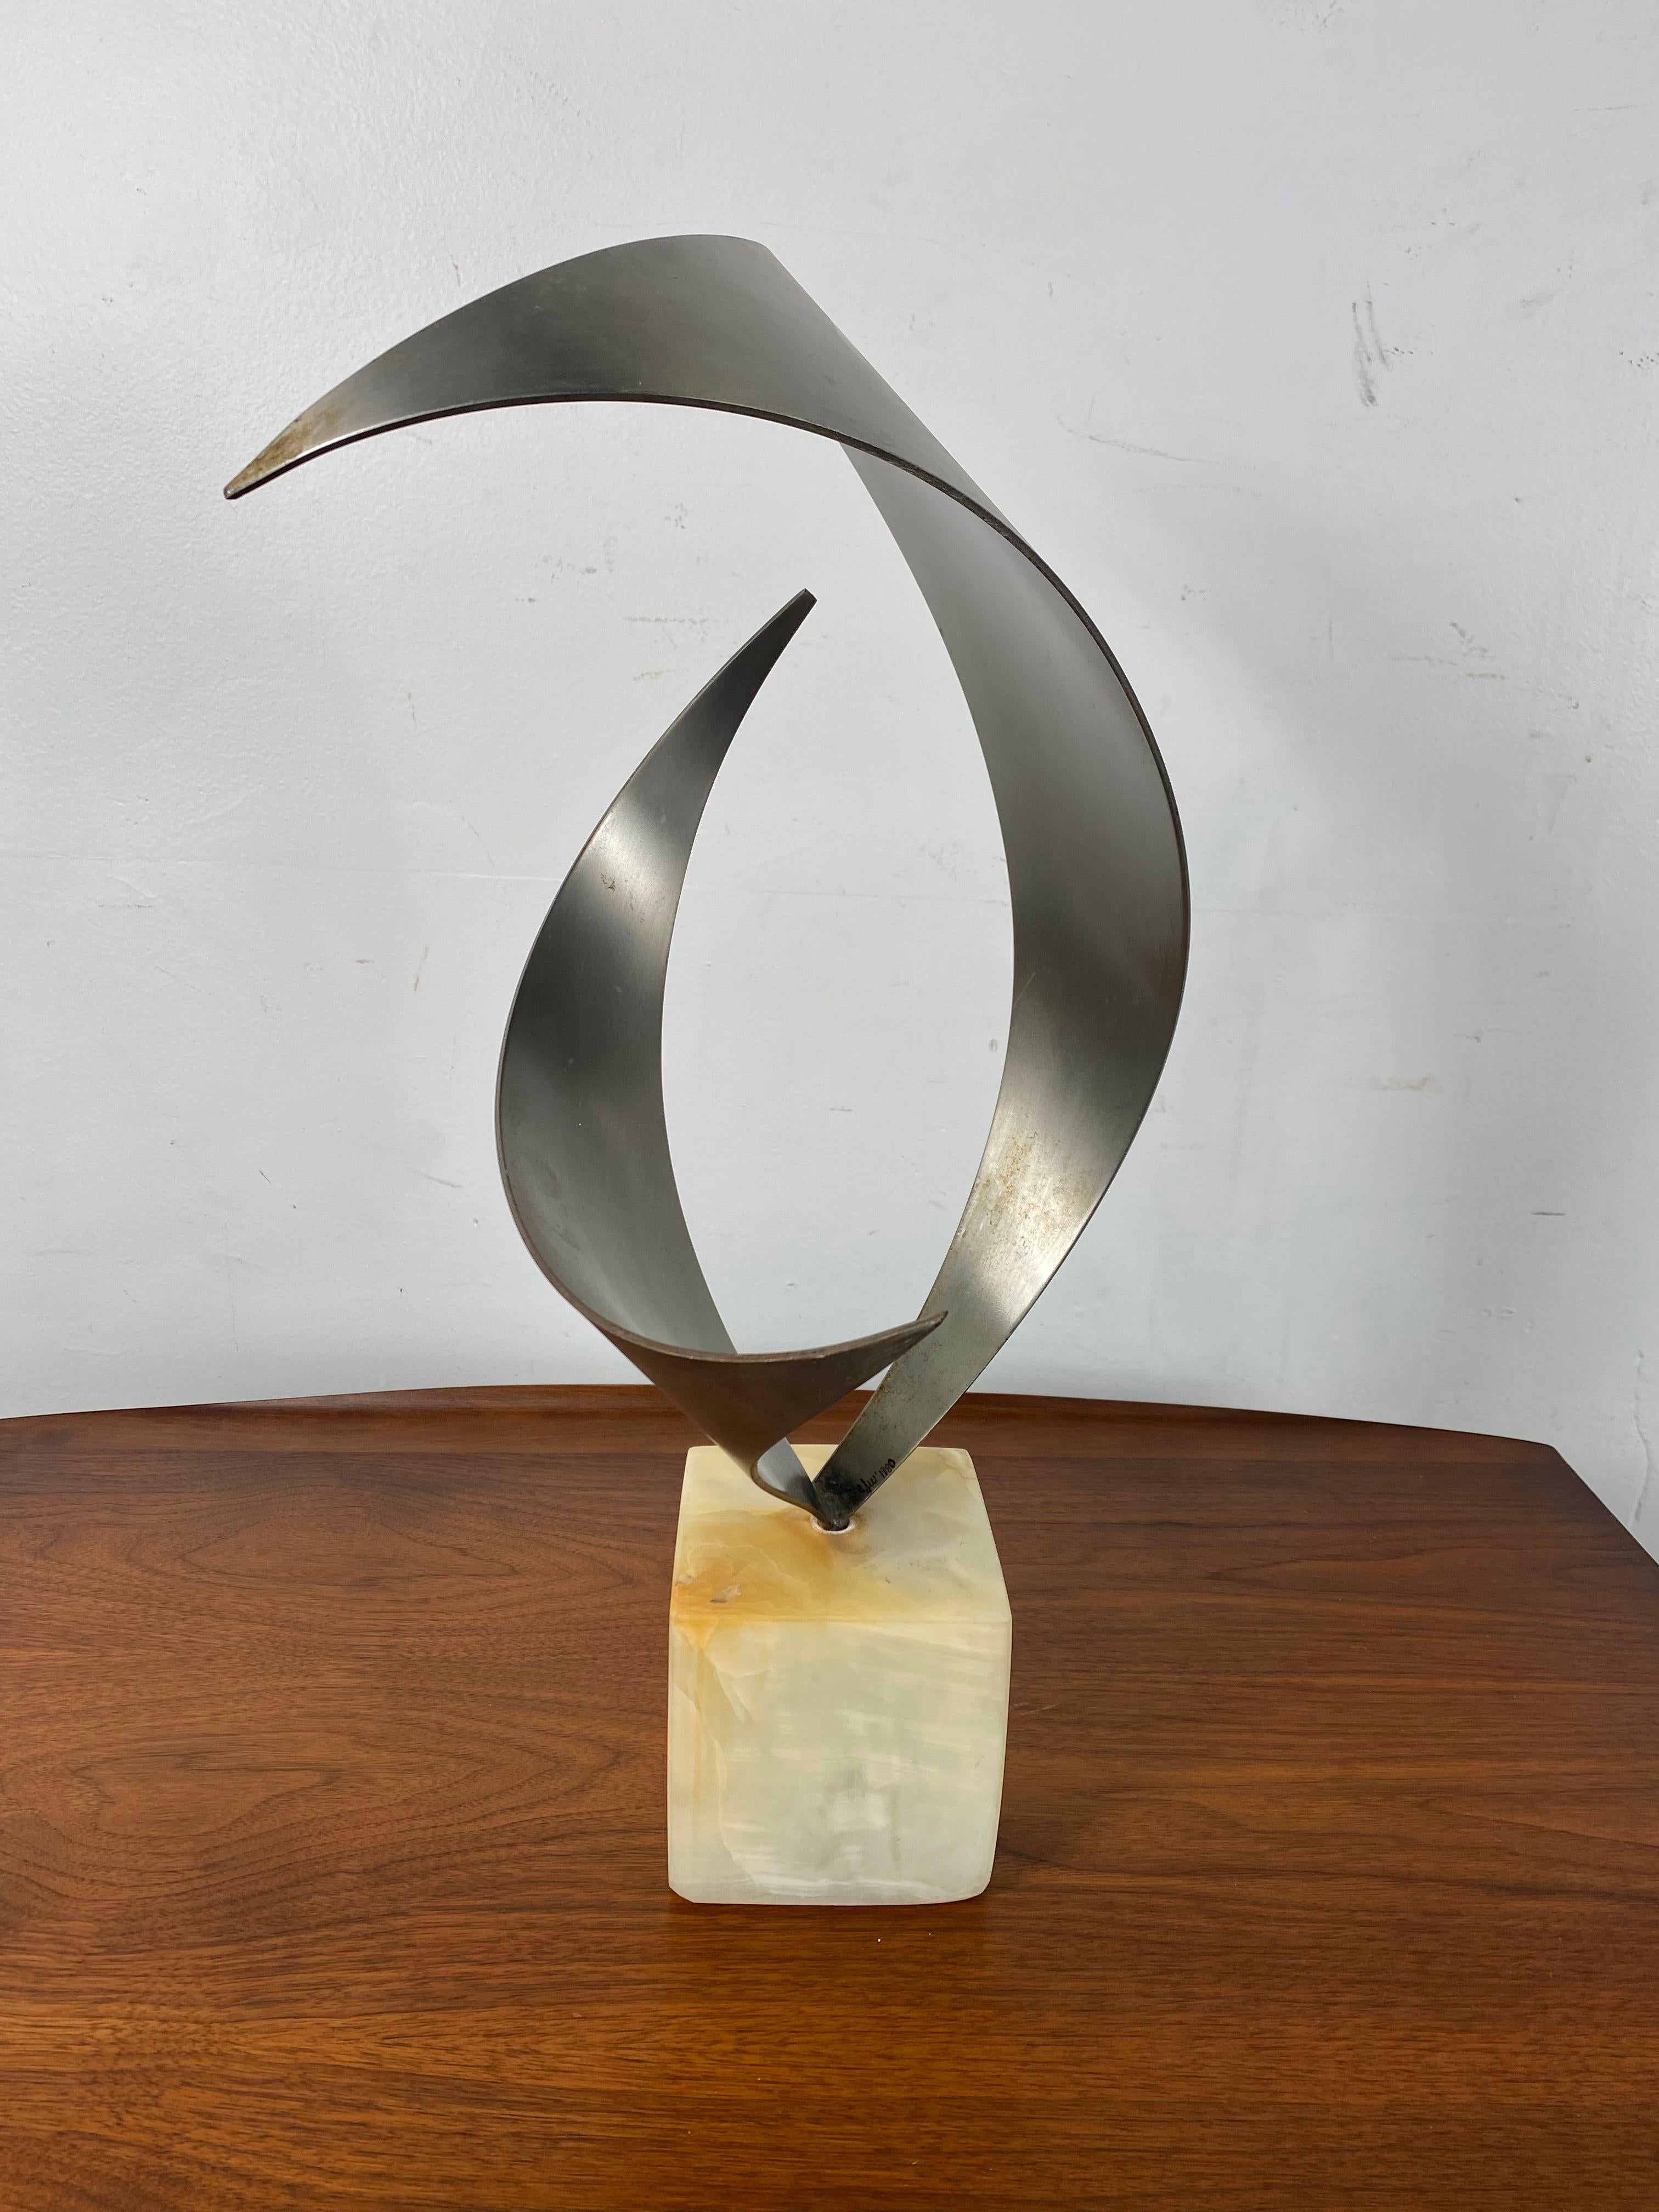 Modernist Steel and Marble Abstract Table Sculpture by C.Jere c.1980 In Good Condition For Sale In Buffalo, NY